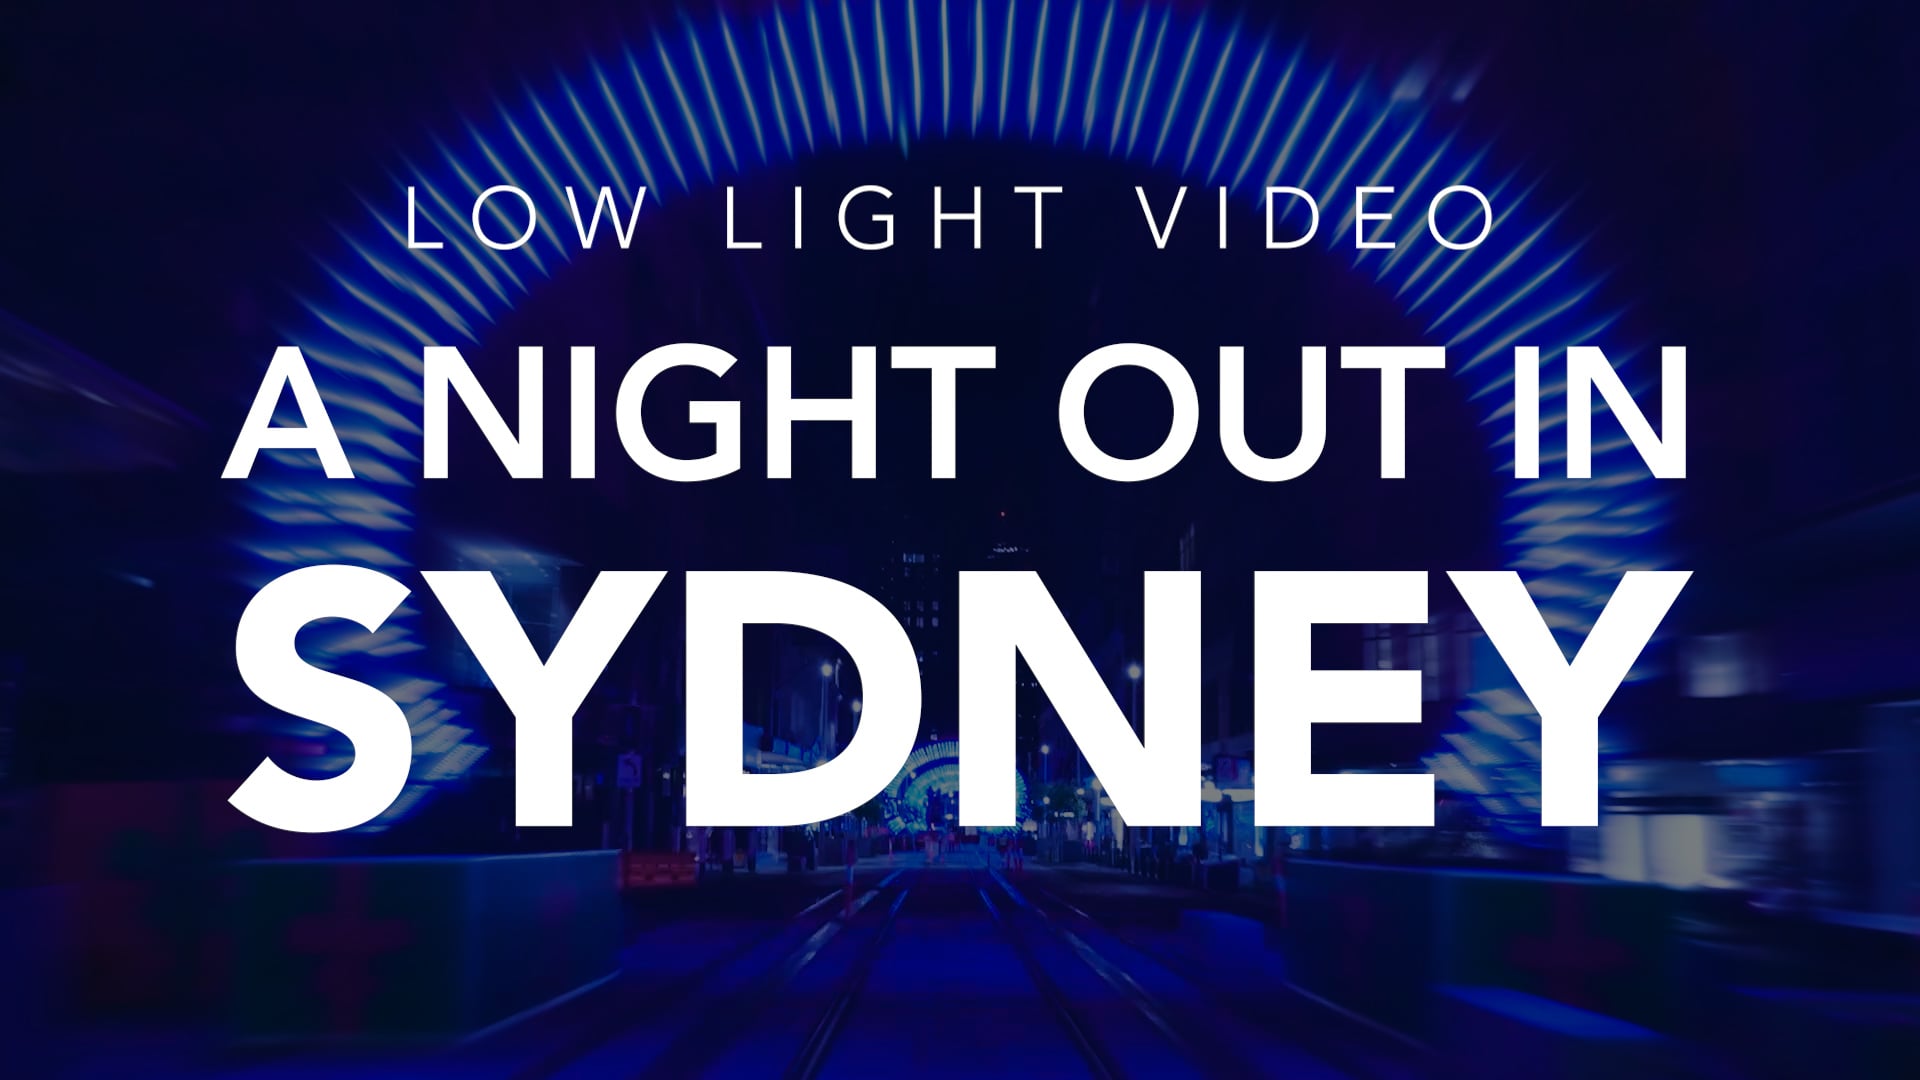 A Night Out in Sydney